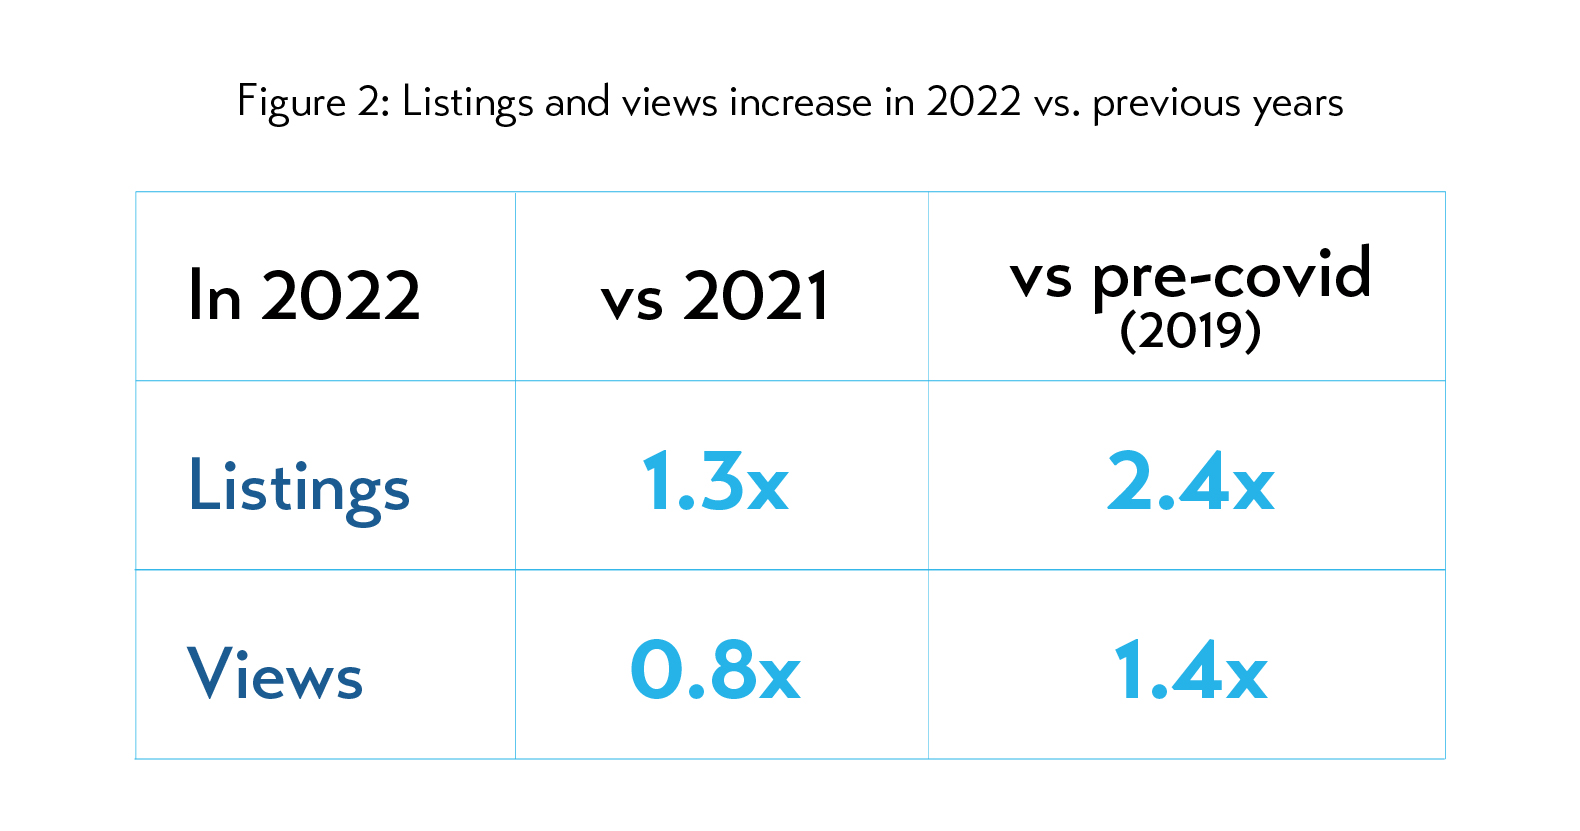 Listings and views increase in 2022 vs. previous years